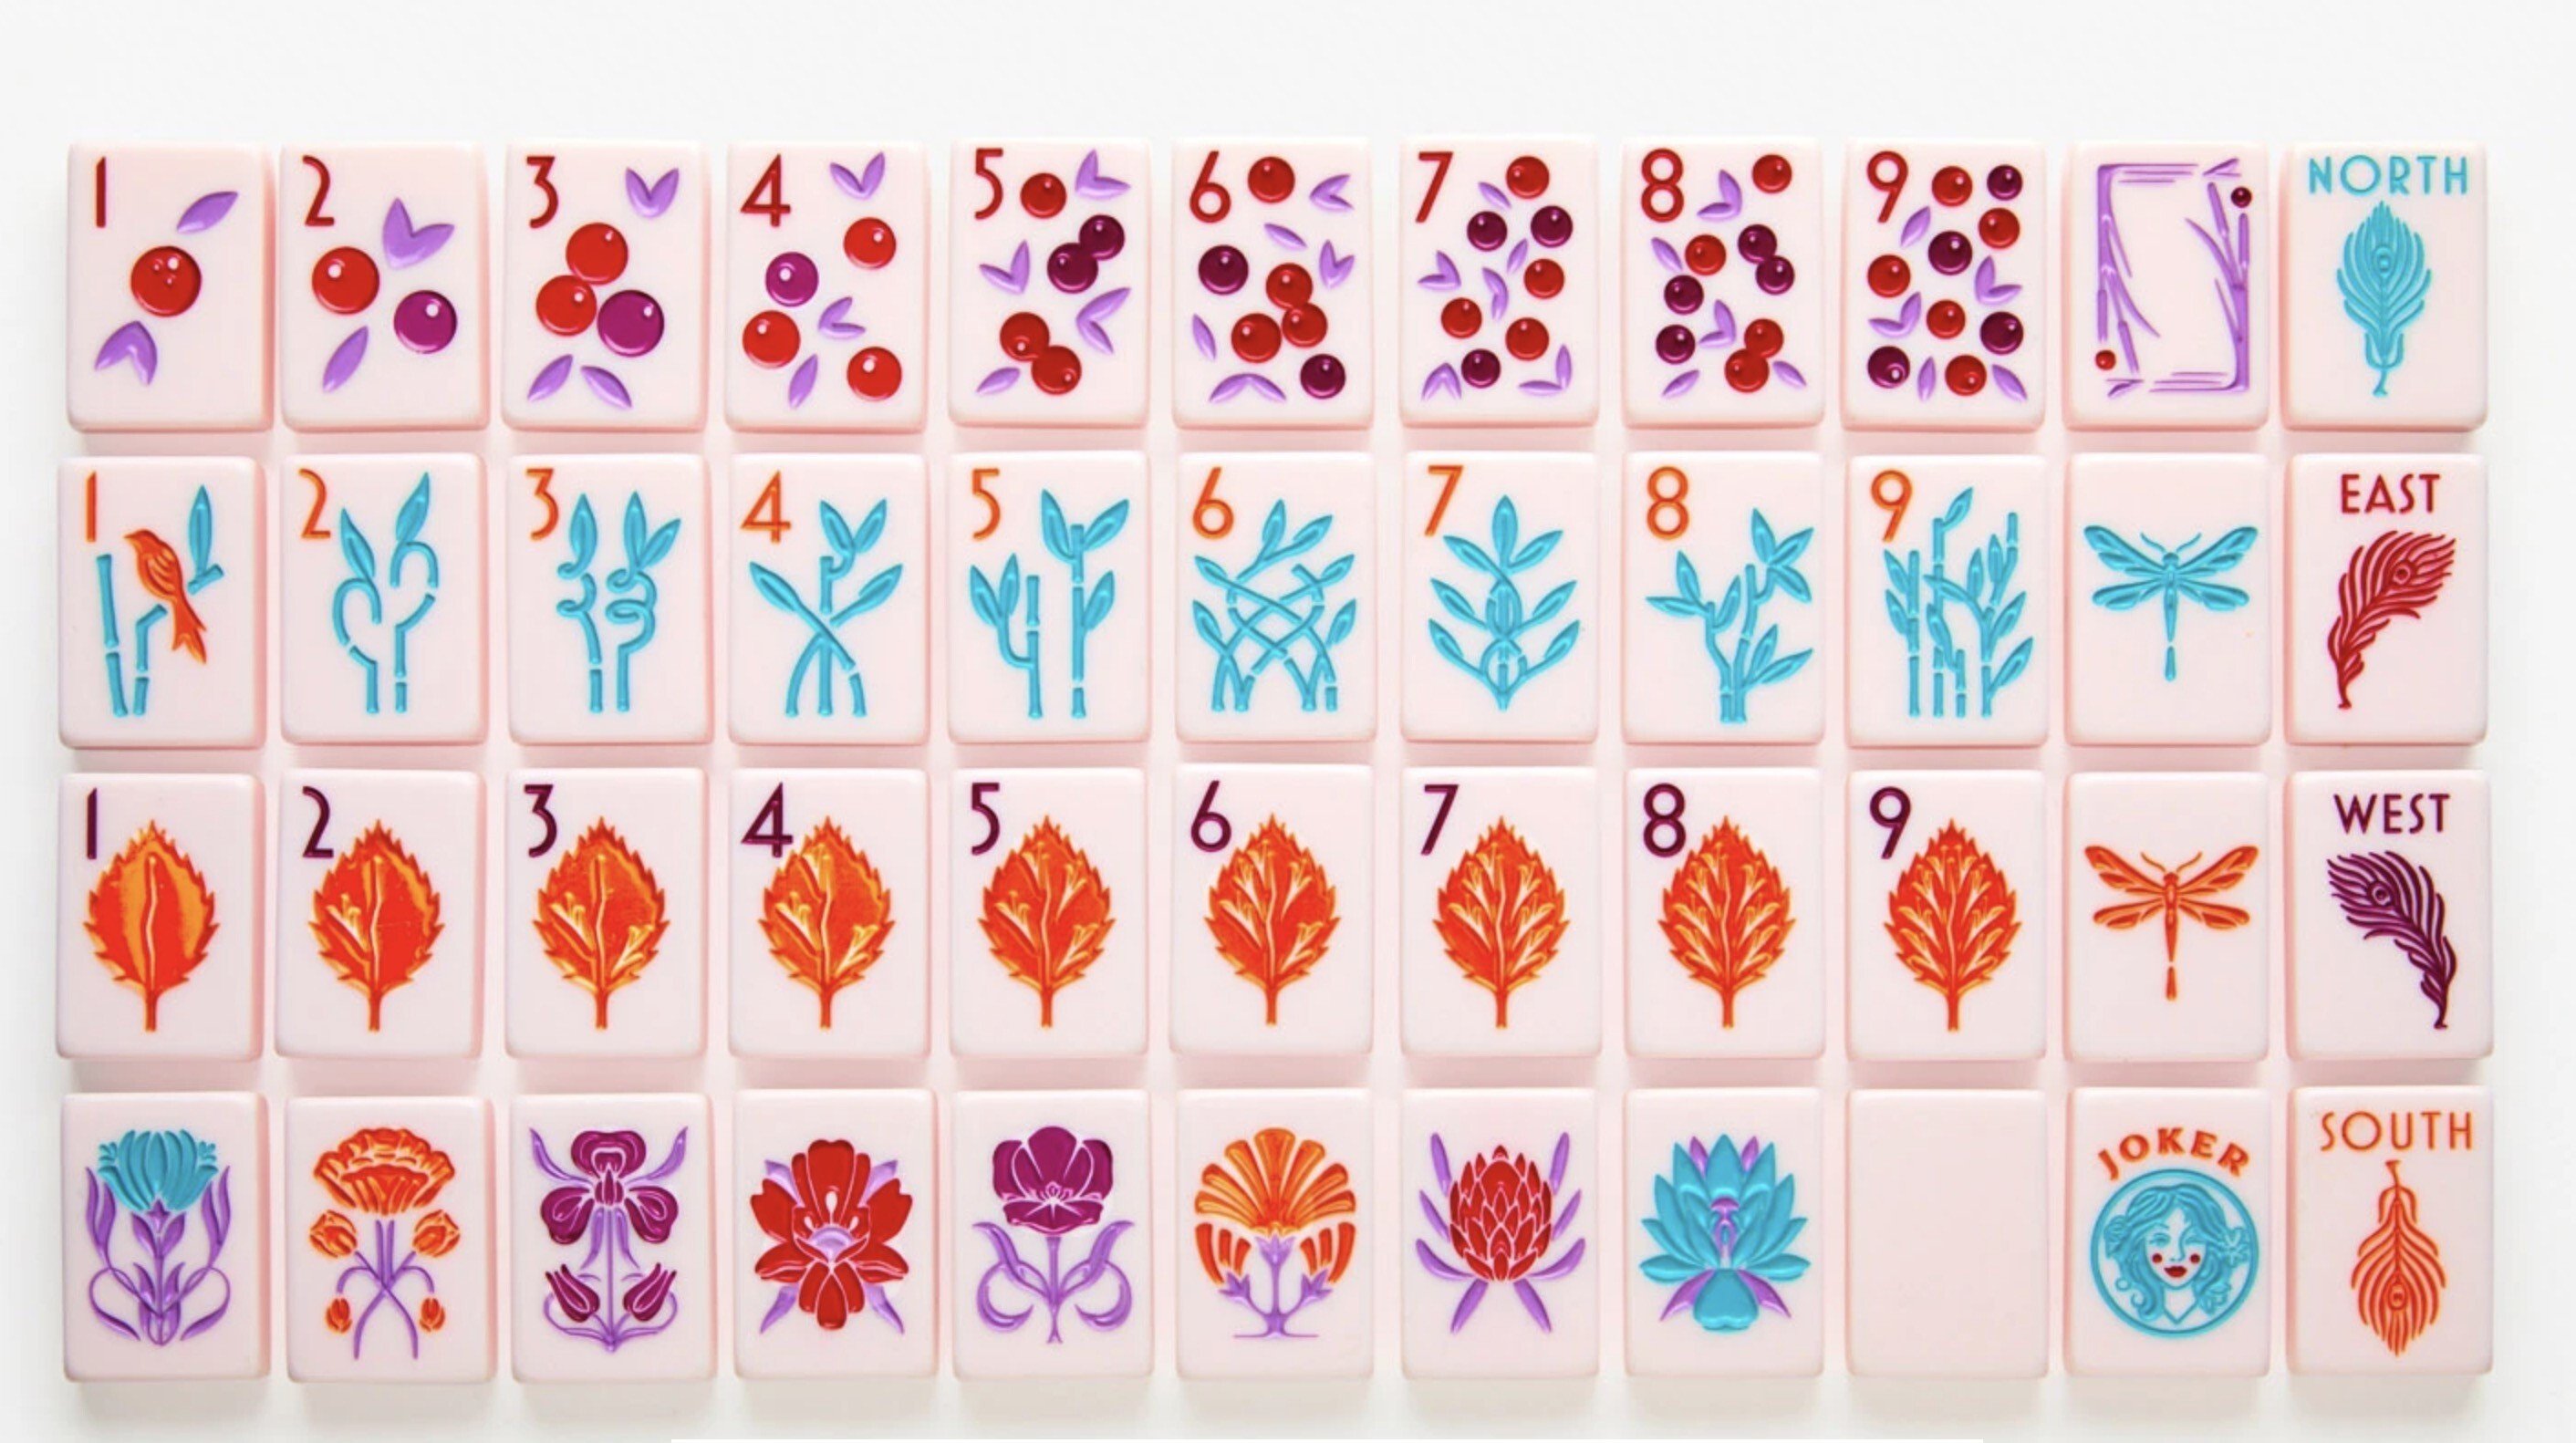 Mahjong design 'refresh' by US company reignites debate over